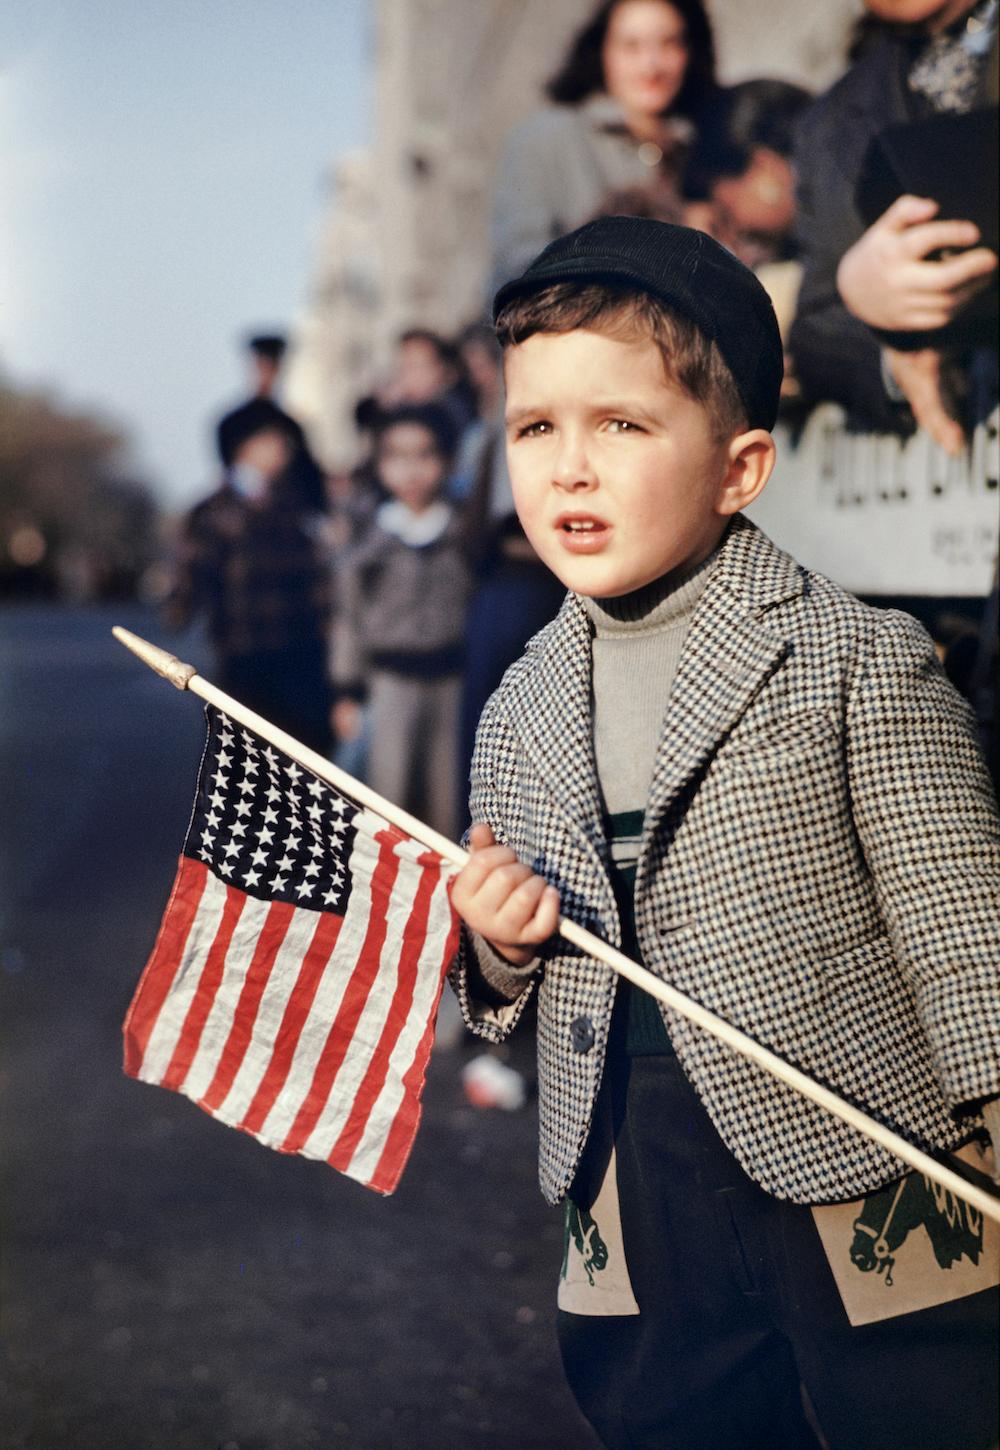 Ruth Orkin Color Photograph - Boy with a Flag at Parade, New York City